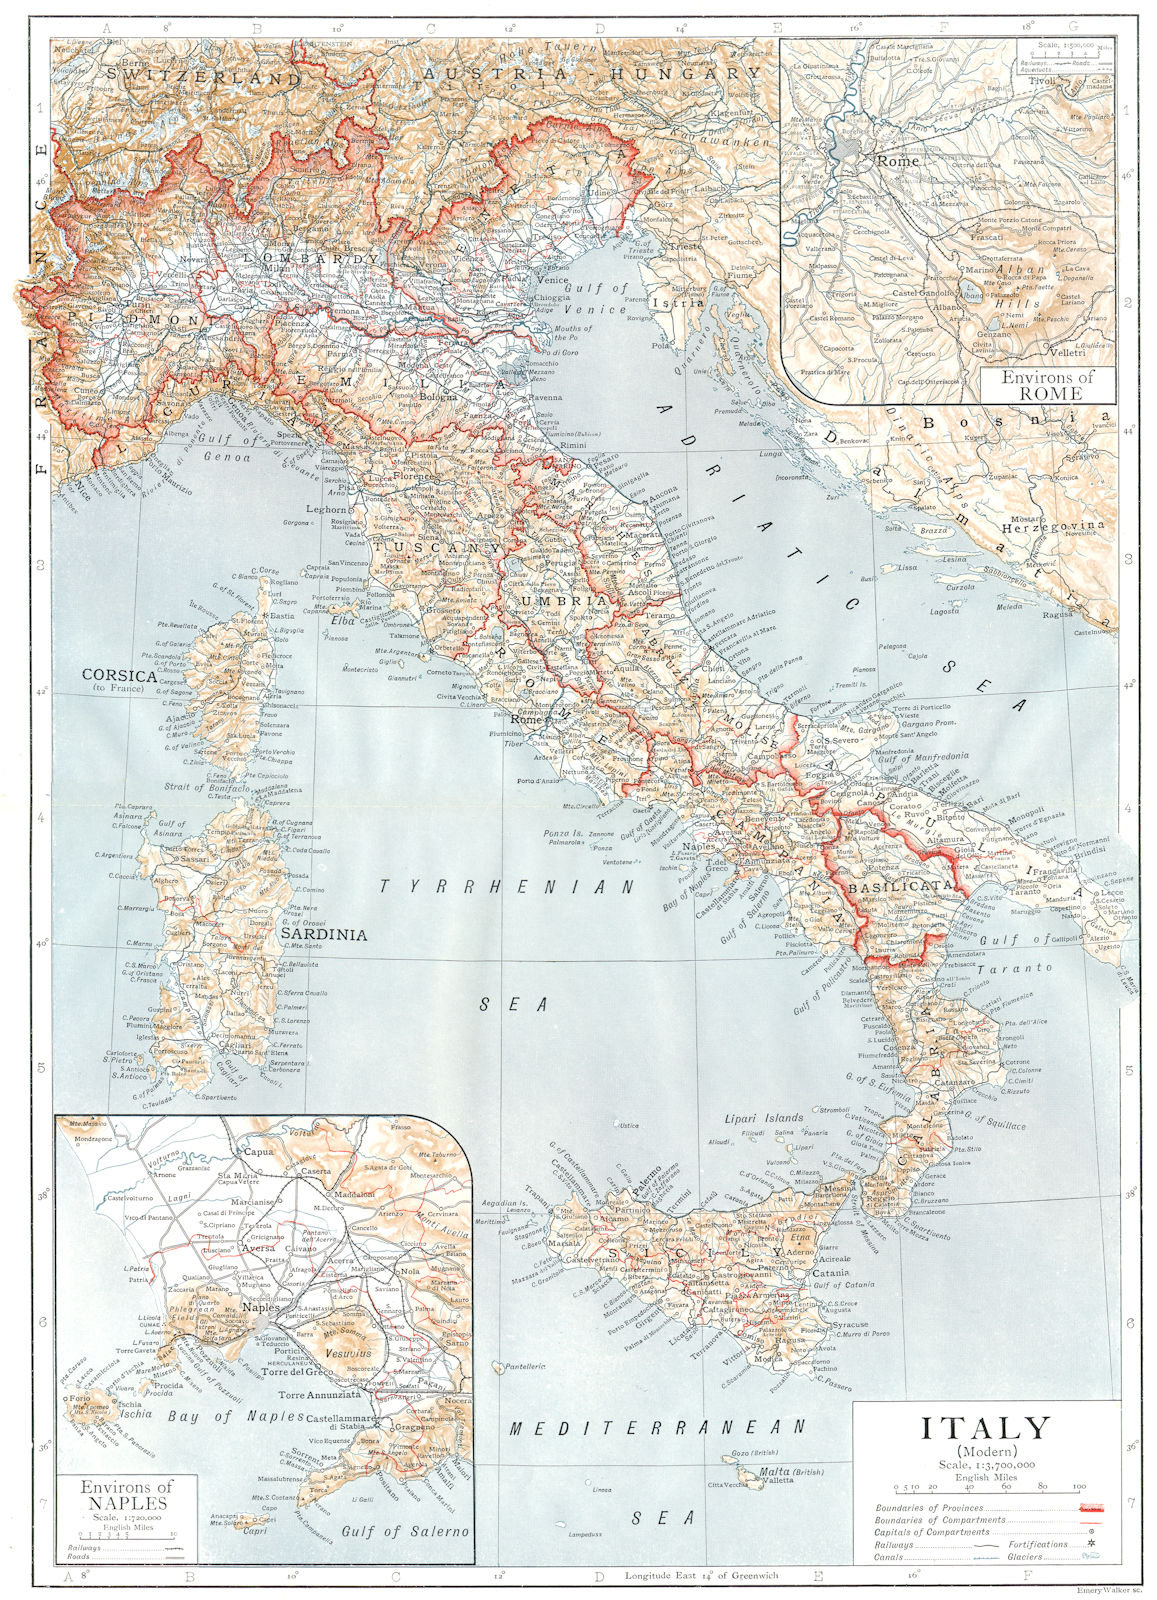 ITALY. Italy (Modern); Inset Environs of Naples; Environs of Rome 1910 old map